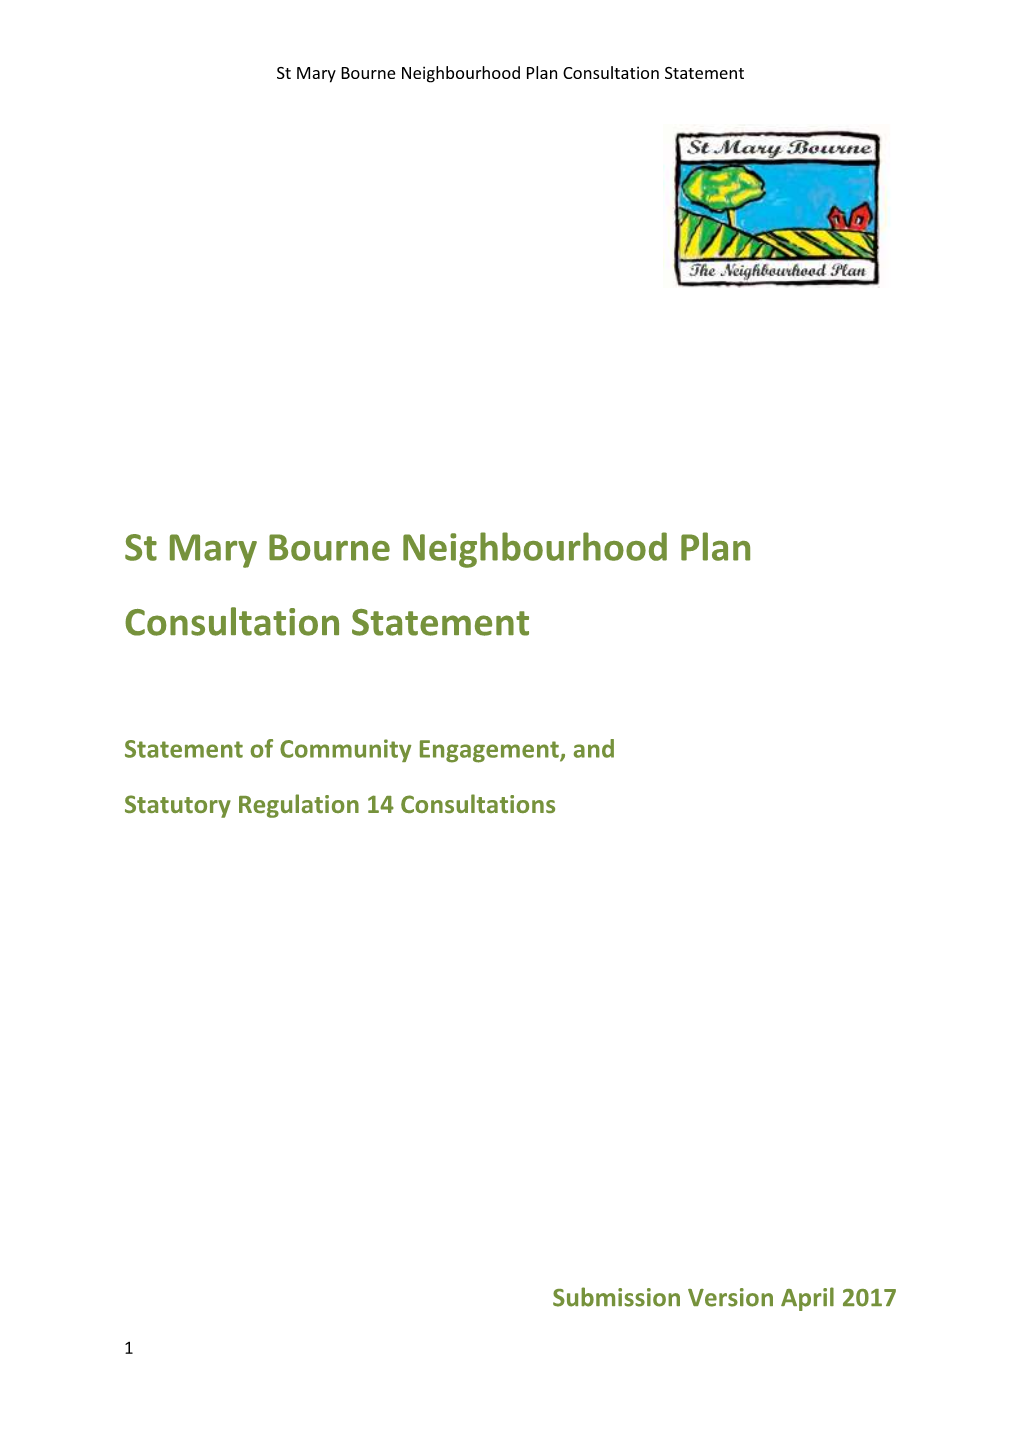 St Mary Bourne Consultation Statement